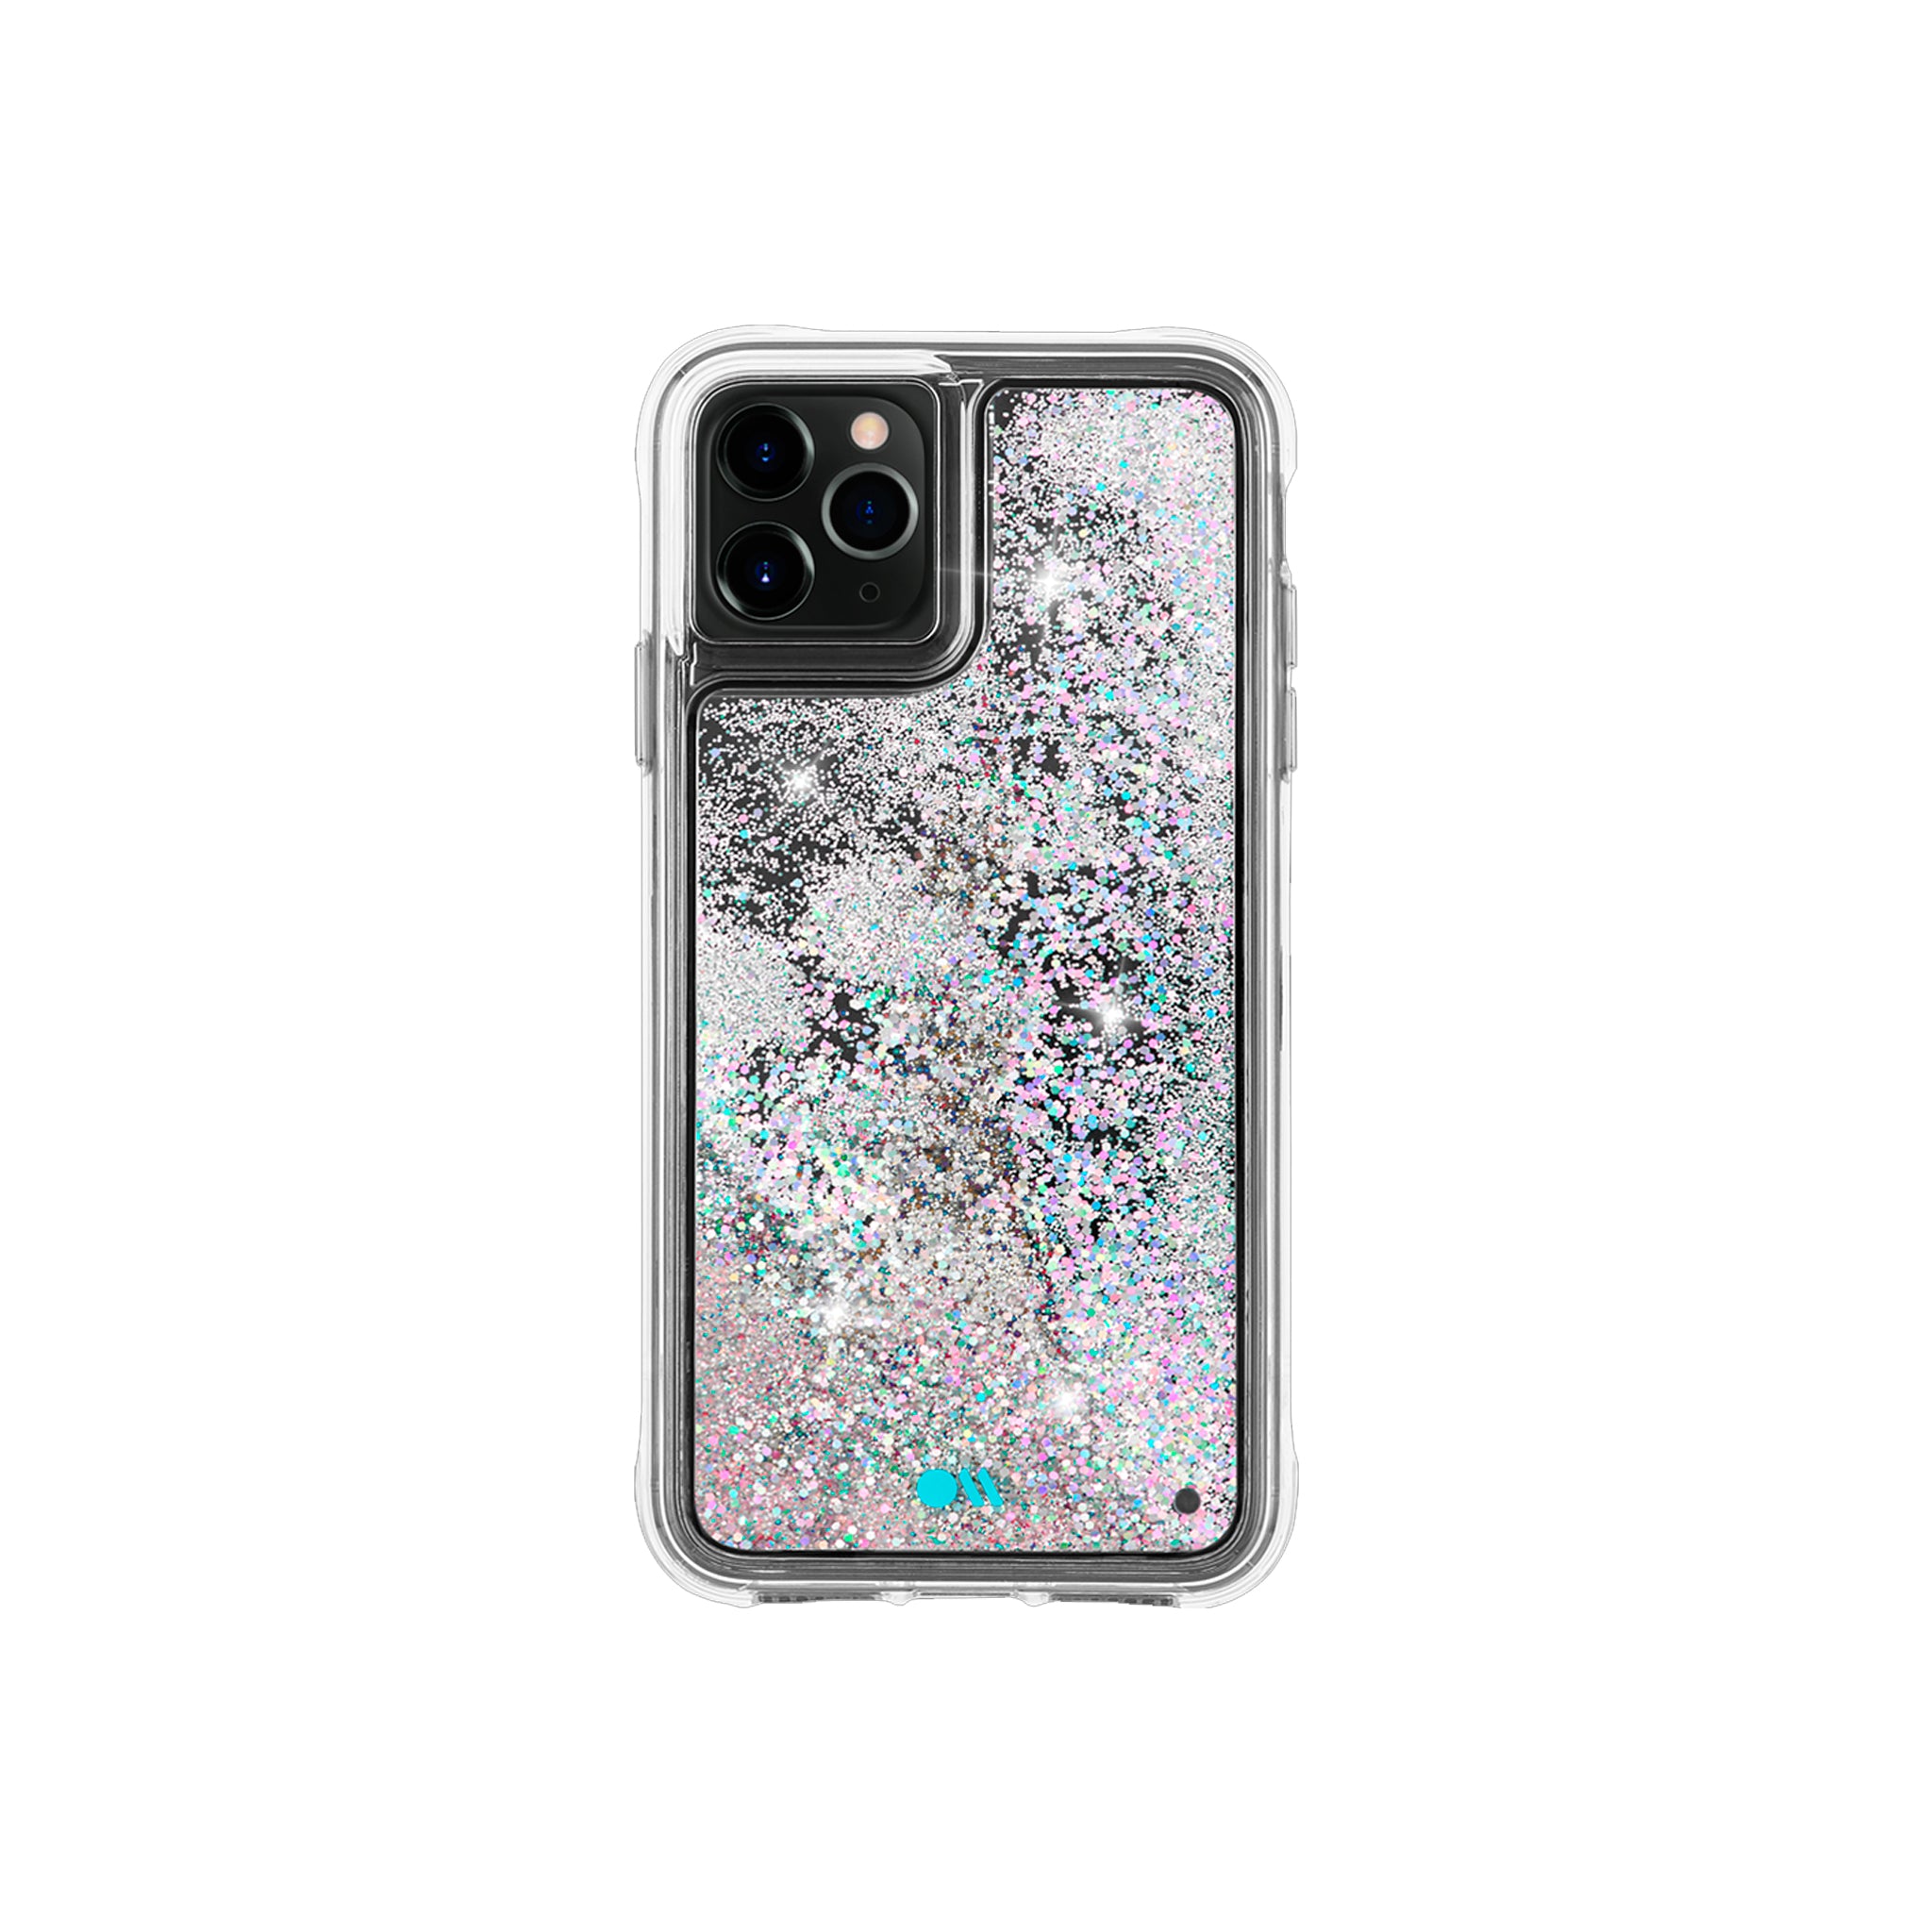 Case-mate - Waterfall Case For Apple iPhone 11 Pro Max - Iridescent